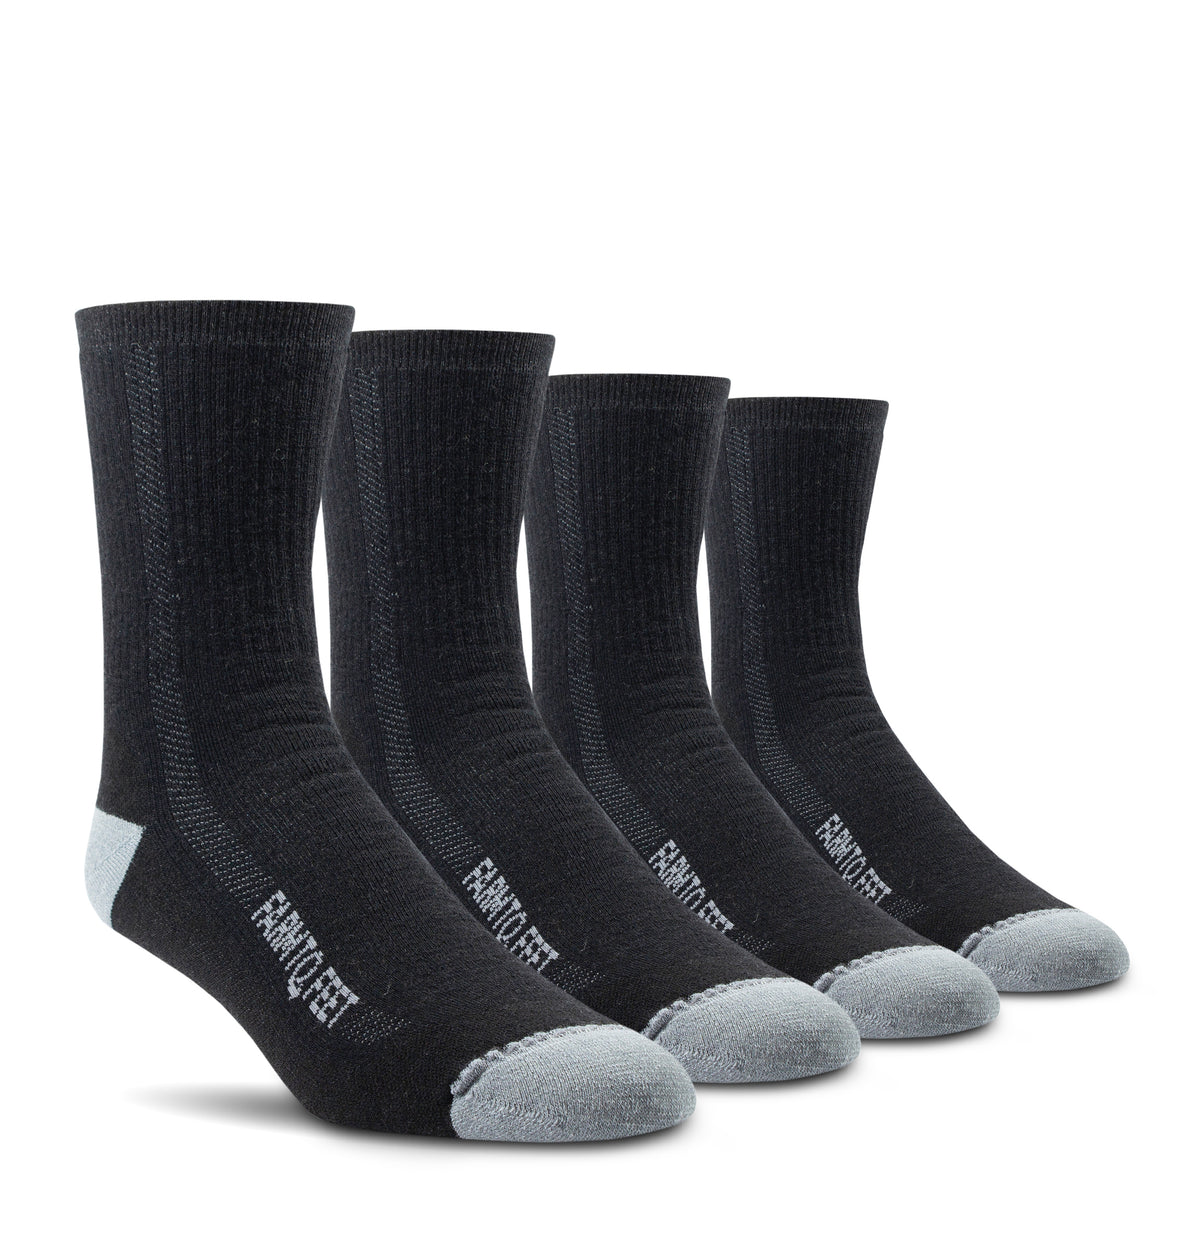 Mile-High Comfort Bundle: 4 Pairs - Assorted Cushion